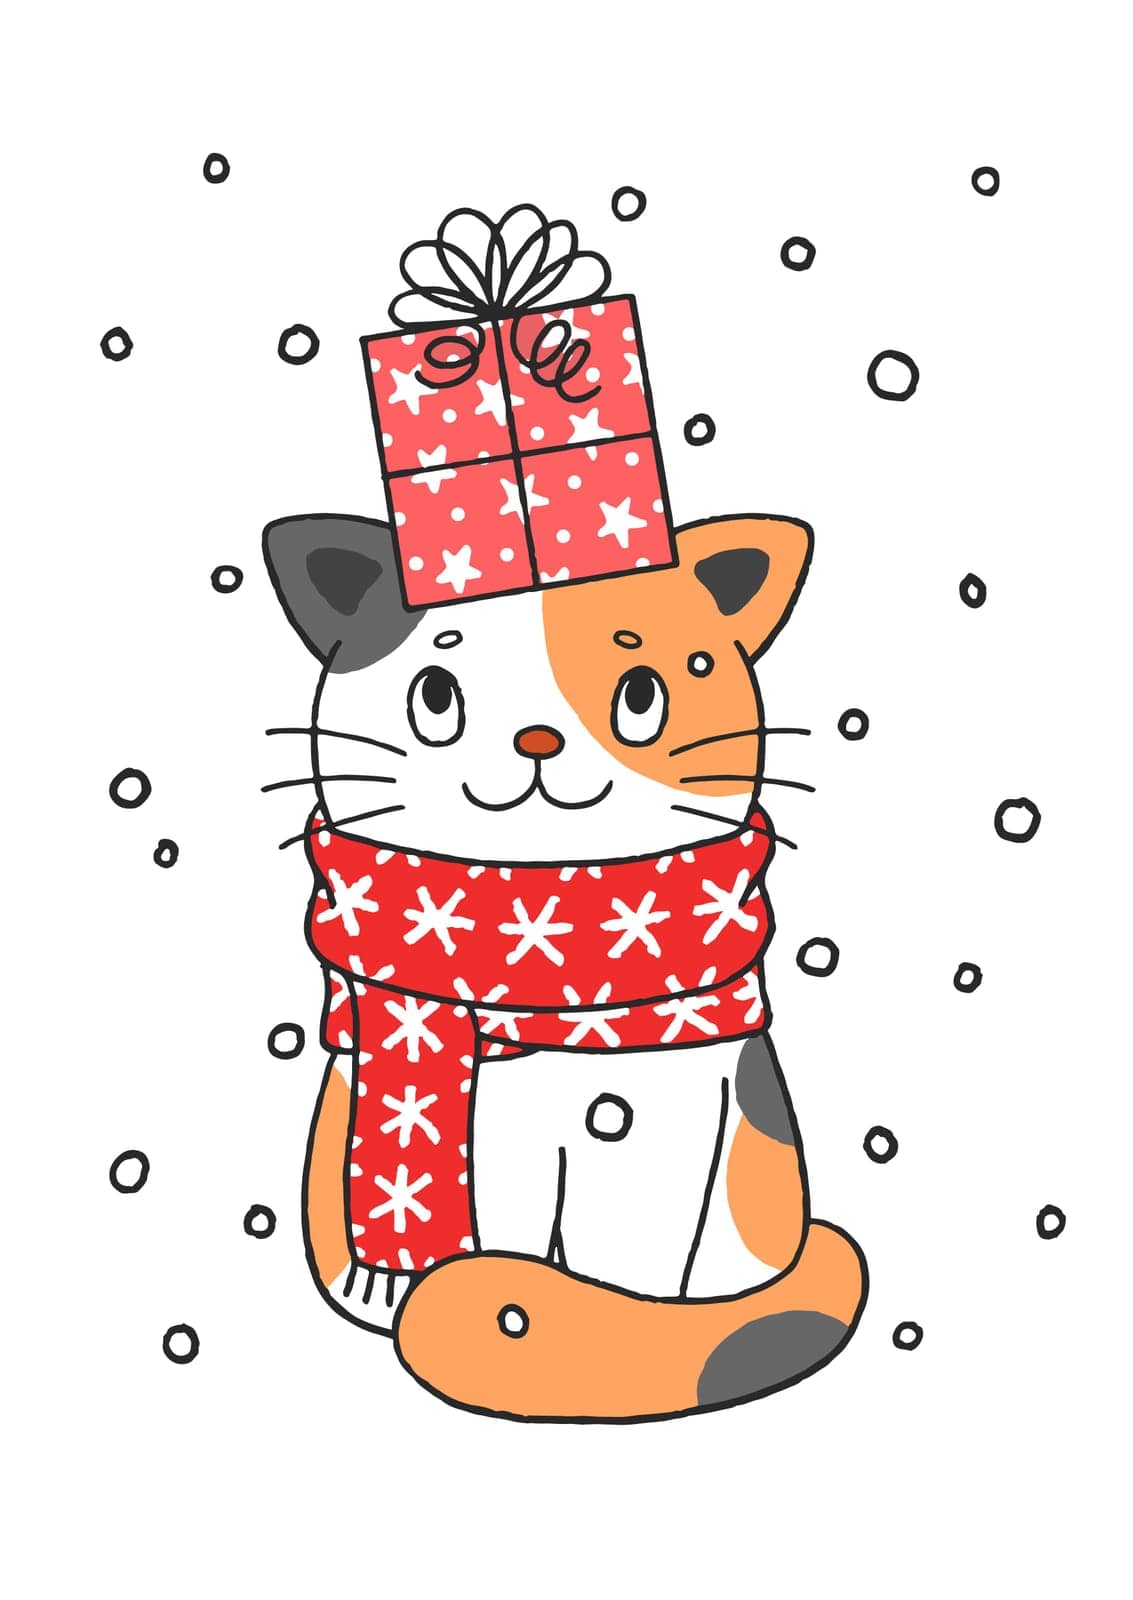 Cute Hand Drawn Christmas Kitty Cat With Present Box